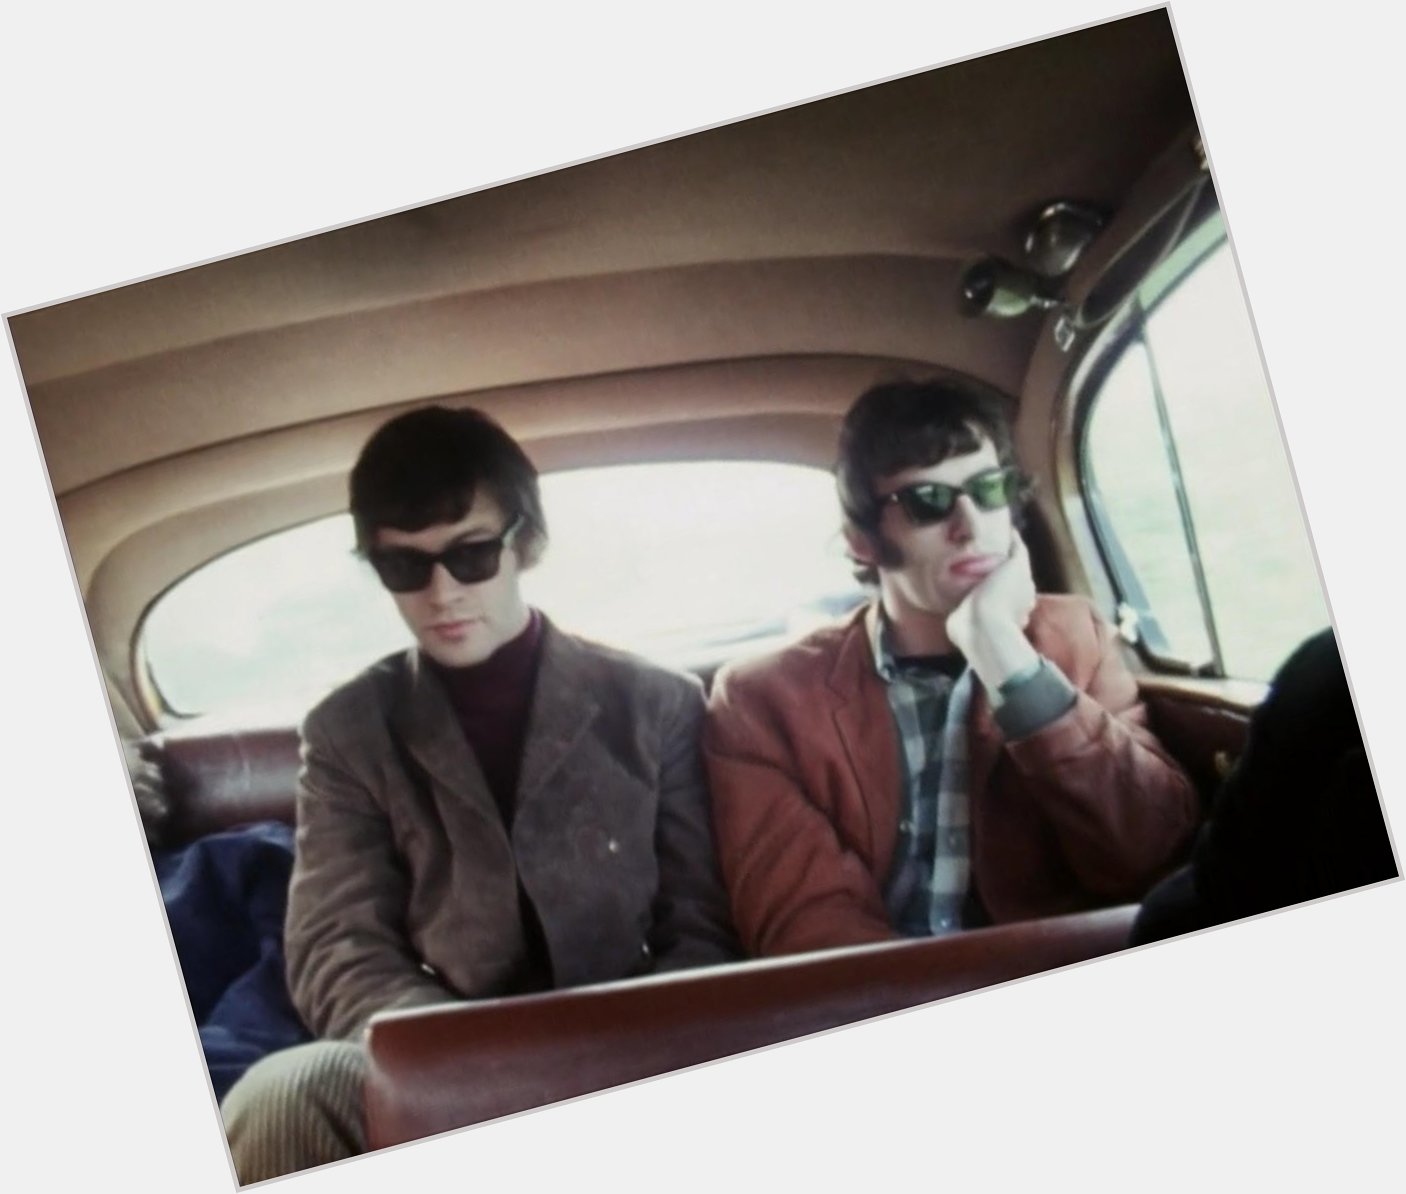 Wishing a happy birthday to Robbie Robertson today! Robbie & Richard in Bob Dylan\s Eat the Document 